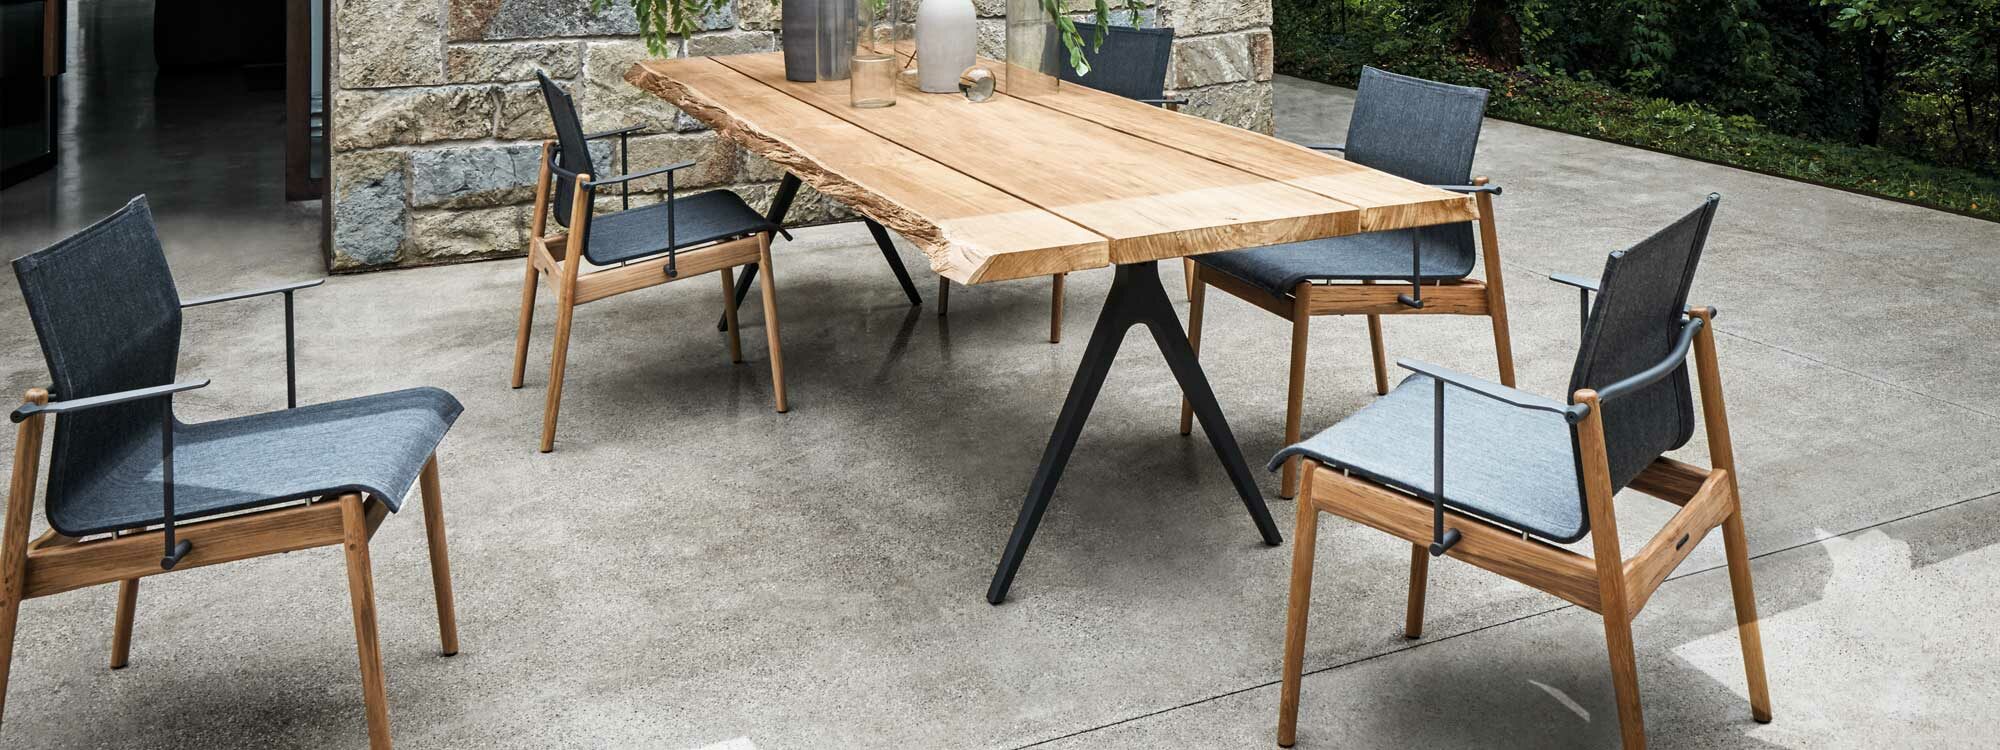 Image of Sway stacking teak garden chairs and Raw teak planked garden table by Gloster